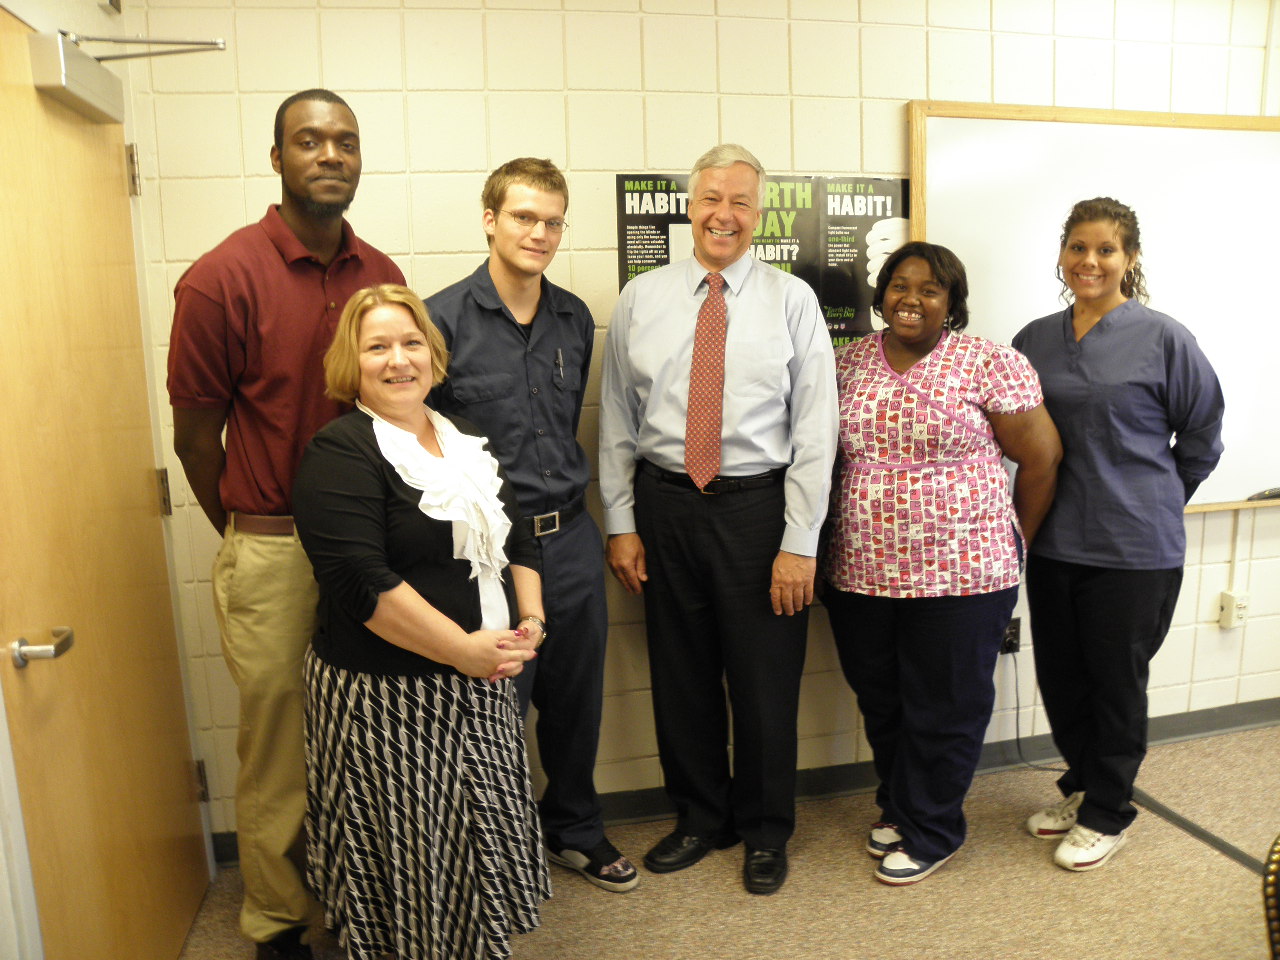 Job Corps students pictured with Congressman Michaud & CD, Patty Wooten